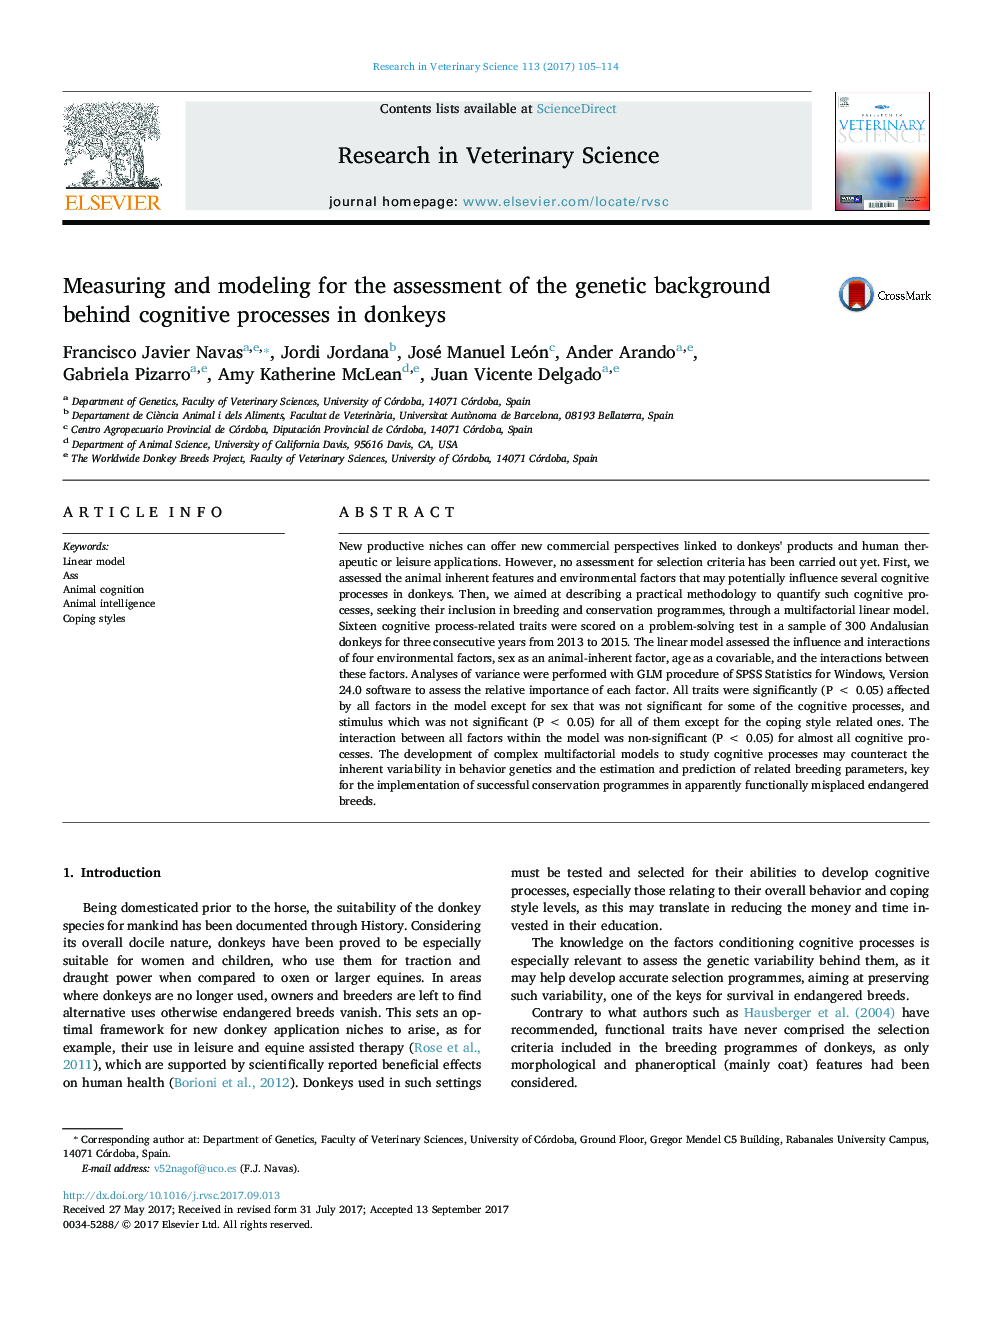 Measuring and modeling for the assessment of the genetic background behind cognitive processes in donkeys